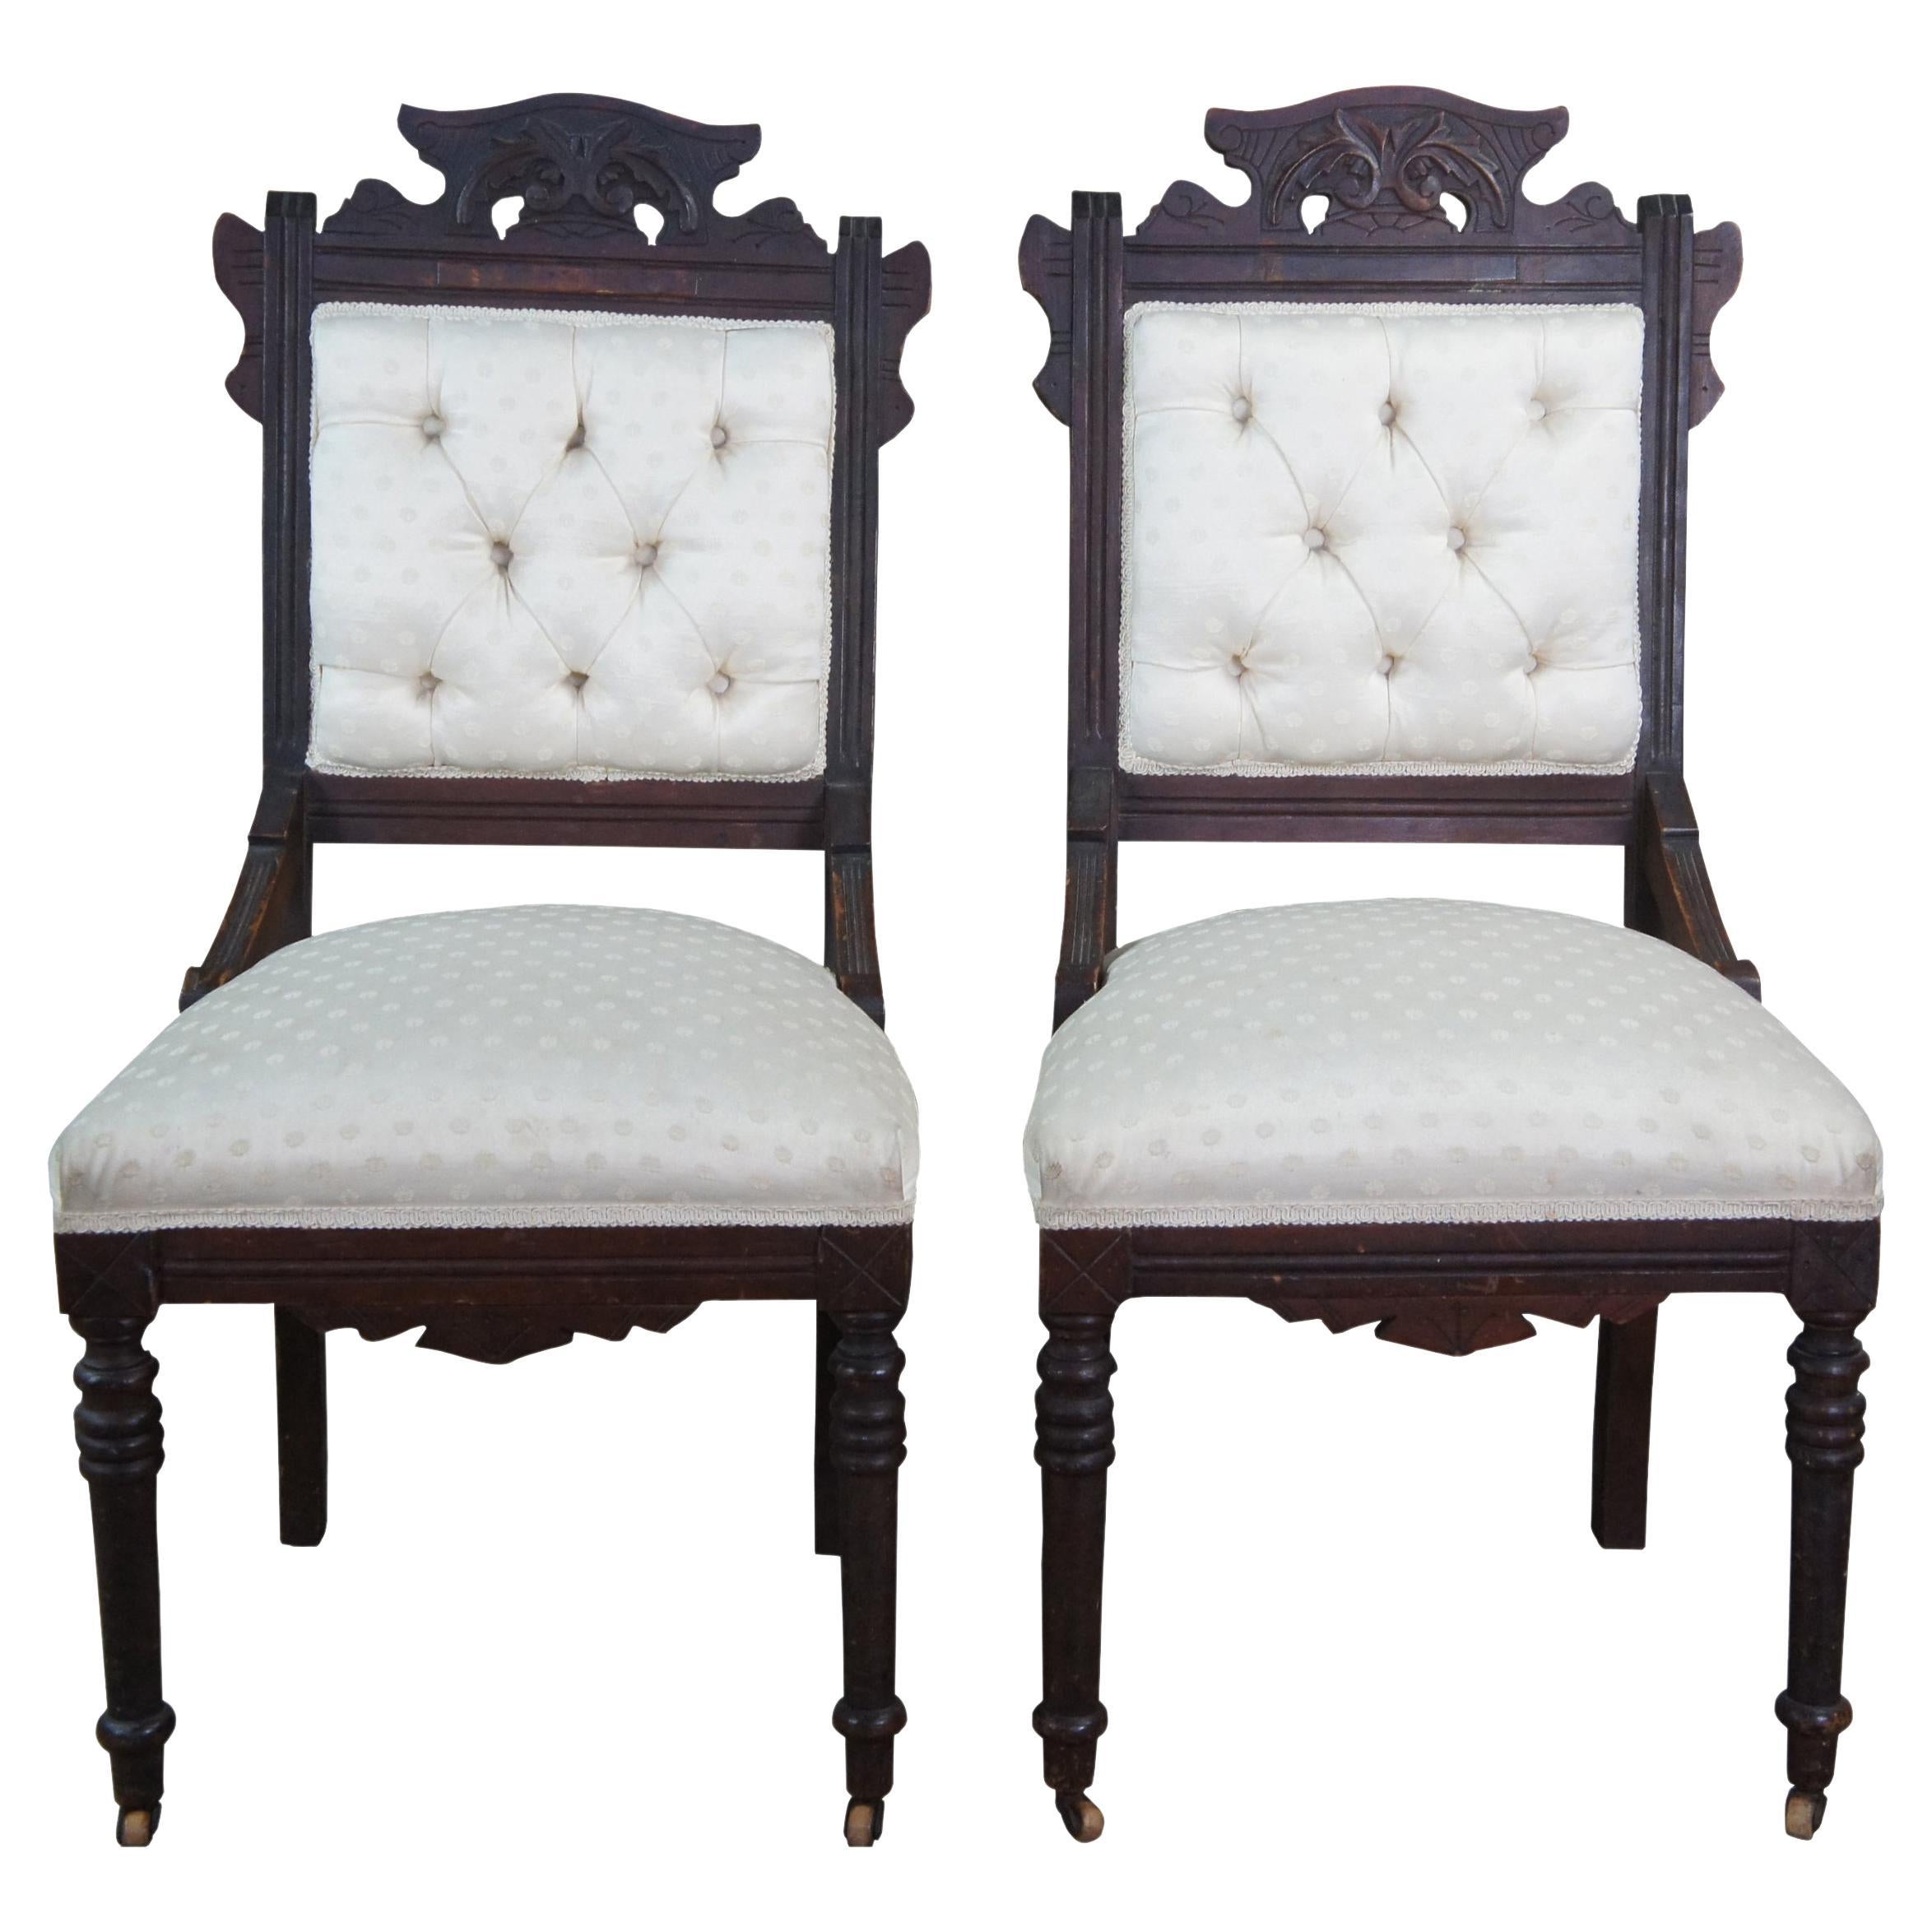 2 Antique Victorian Eastlake Carved Walnut Tufted Side Accent Dining Chairs Pair